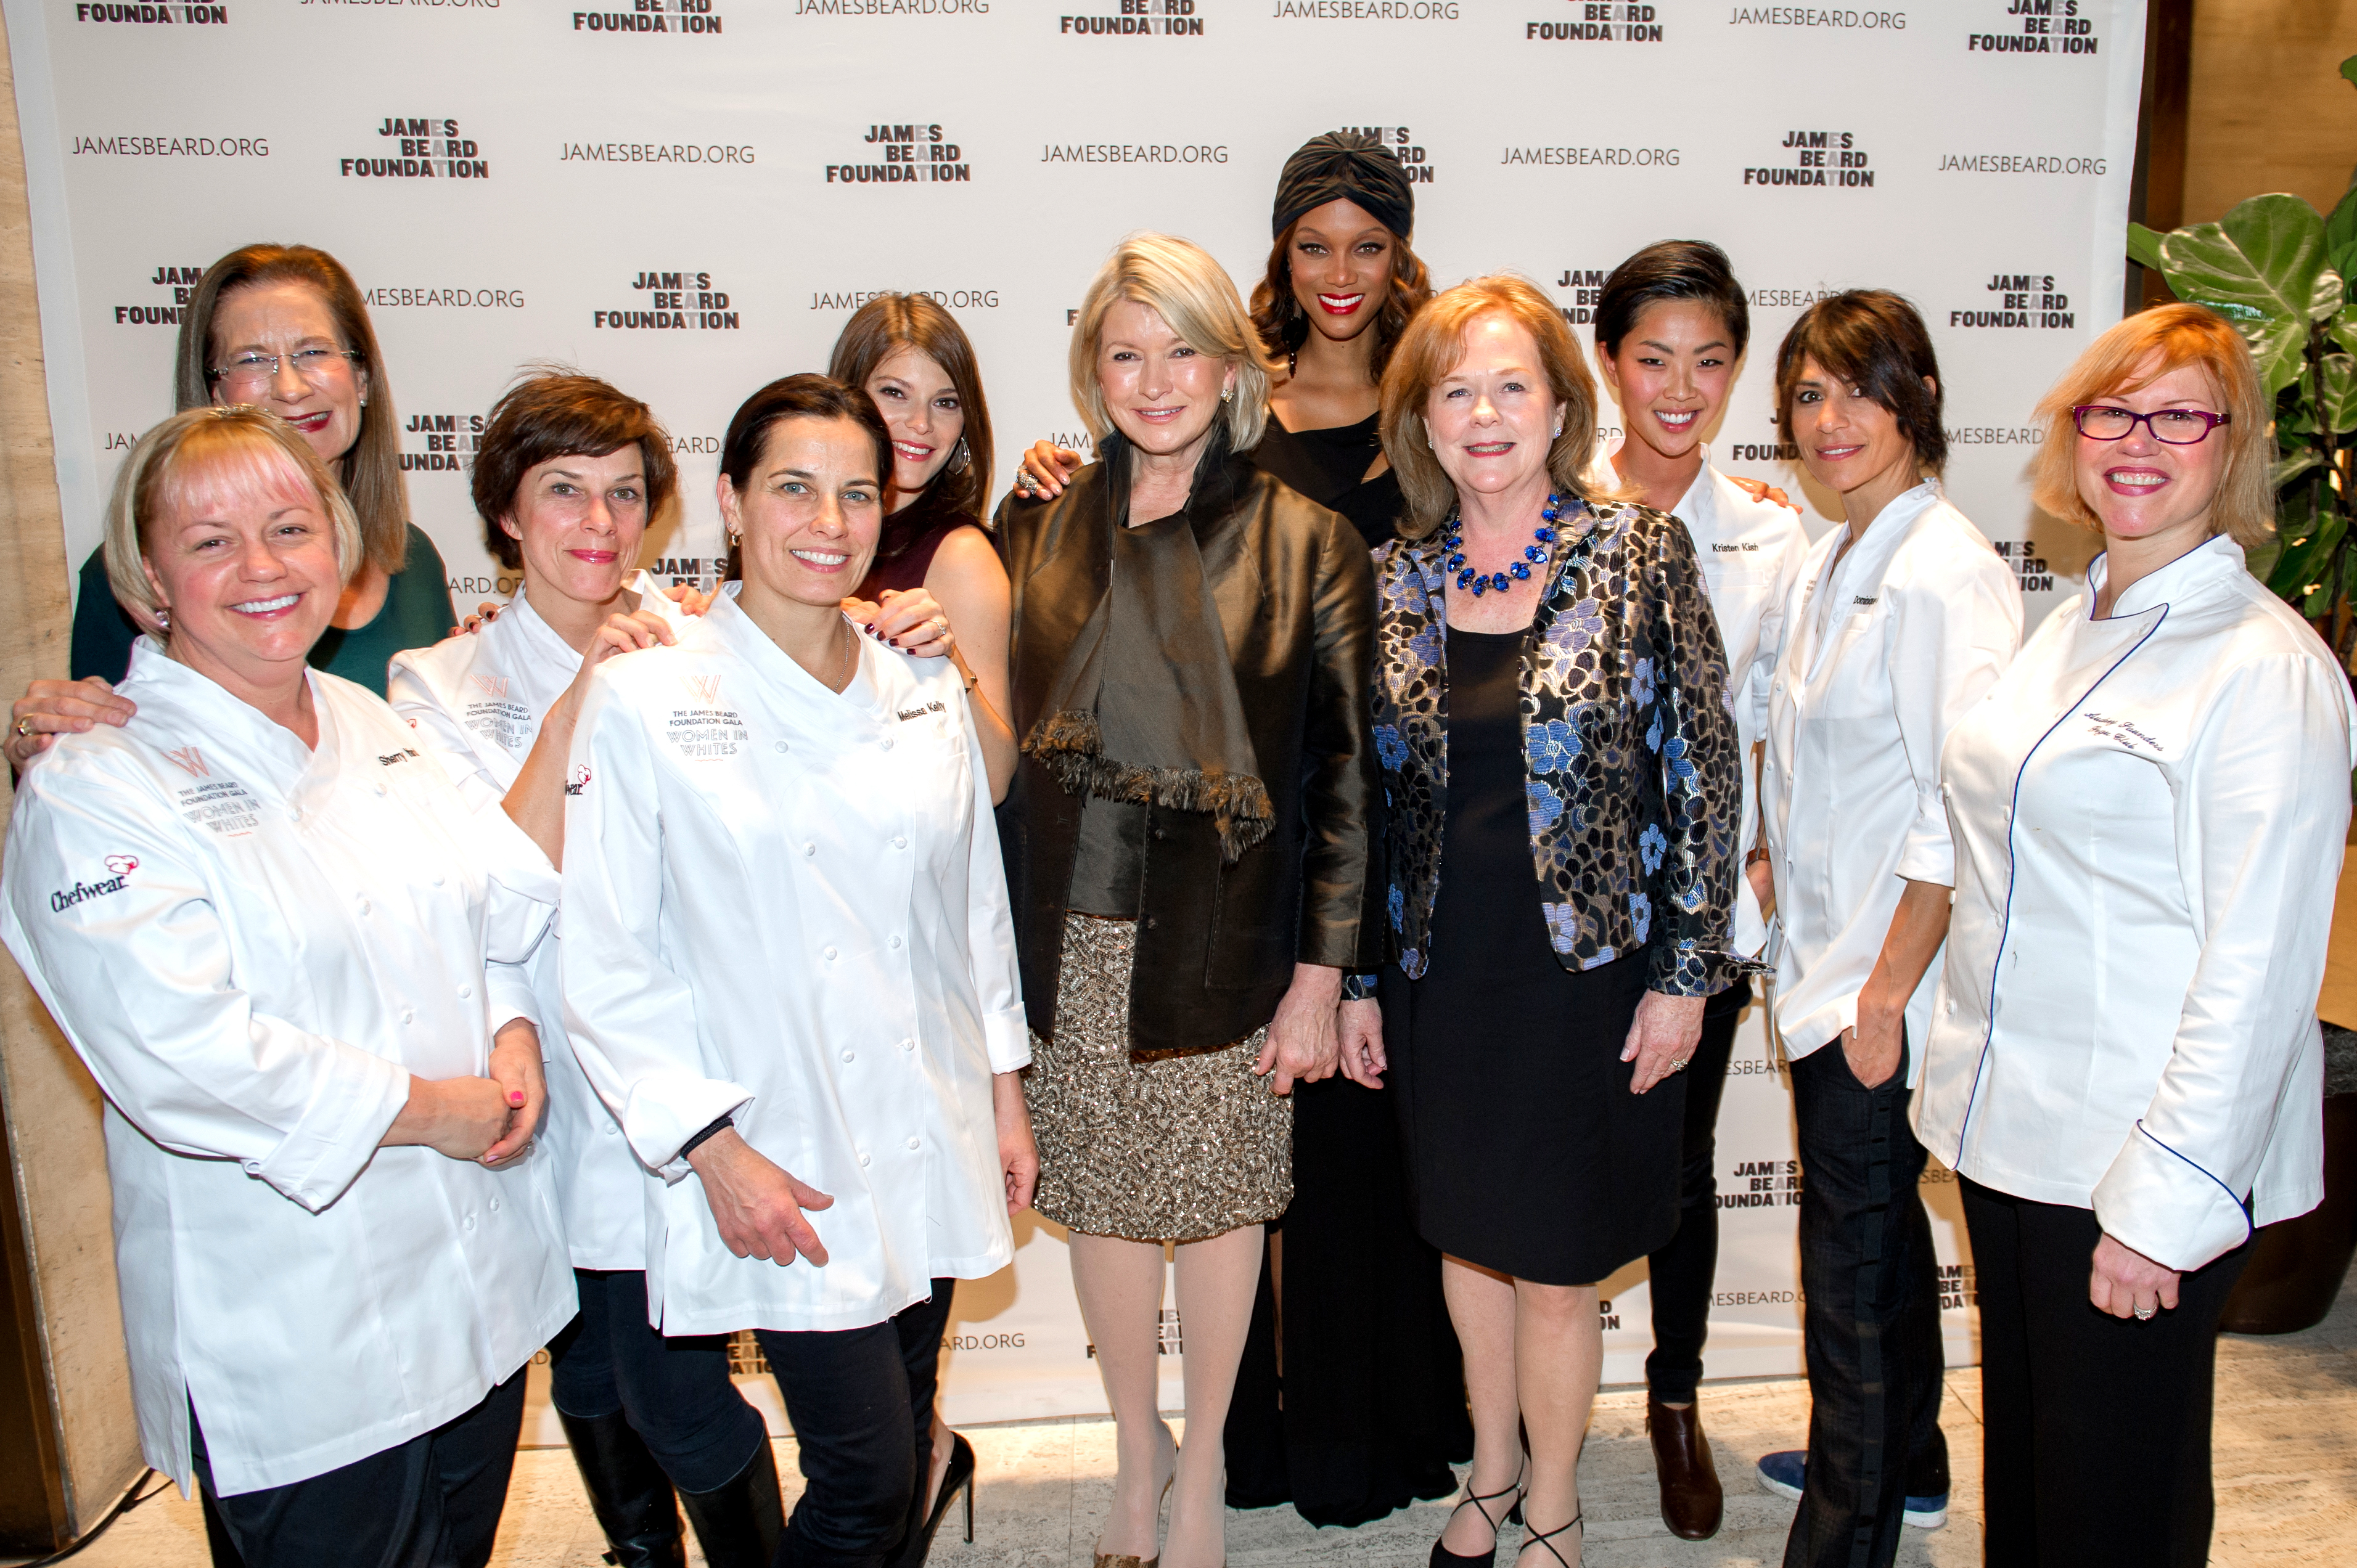 Honorary event chairs Tyra Banks, Gail  Simmons, and Martha Stewart with James Beard Foundation  President Susan Ungaro and all participating chefs (Barbara Lynch is third from left), mixologists, and winemakers at the 2013 James Beard Foundation Women in Whites Gala hosted at the Four Seasons Restaurant in New York.